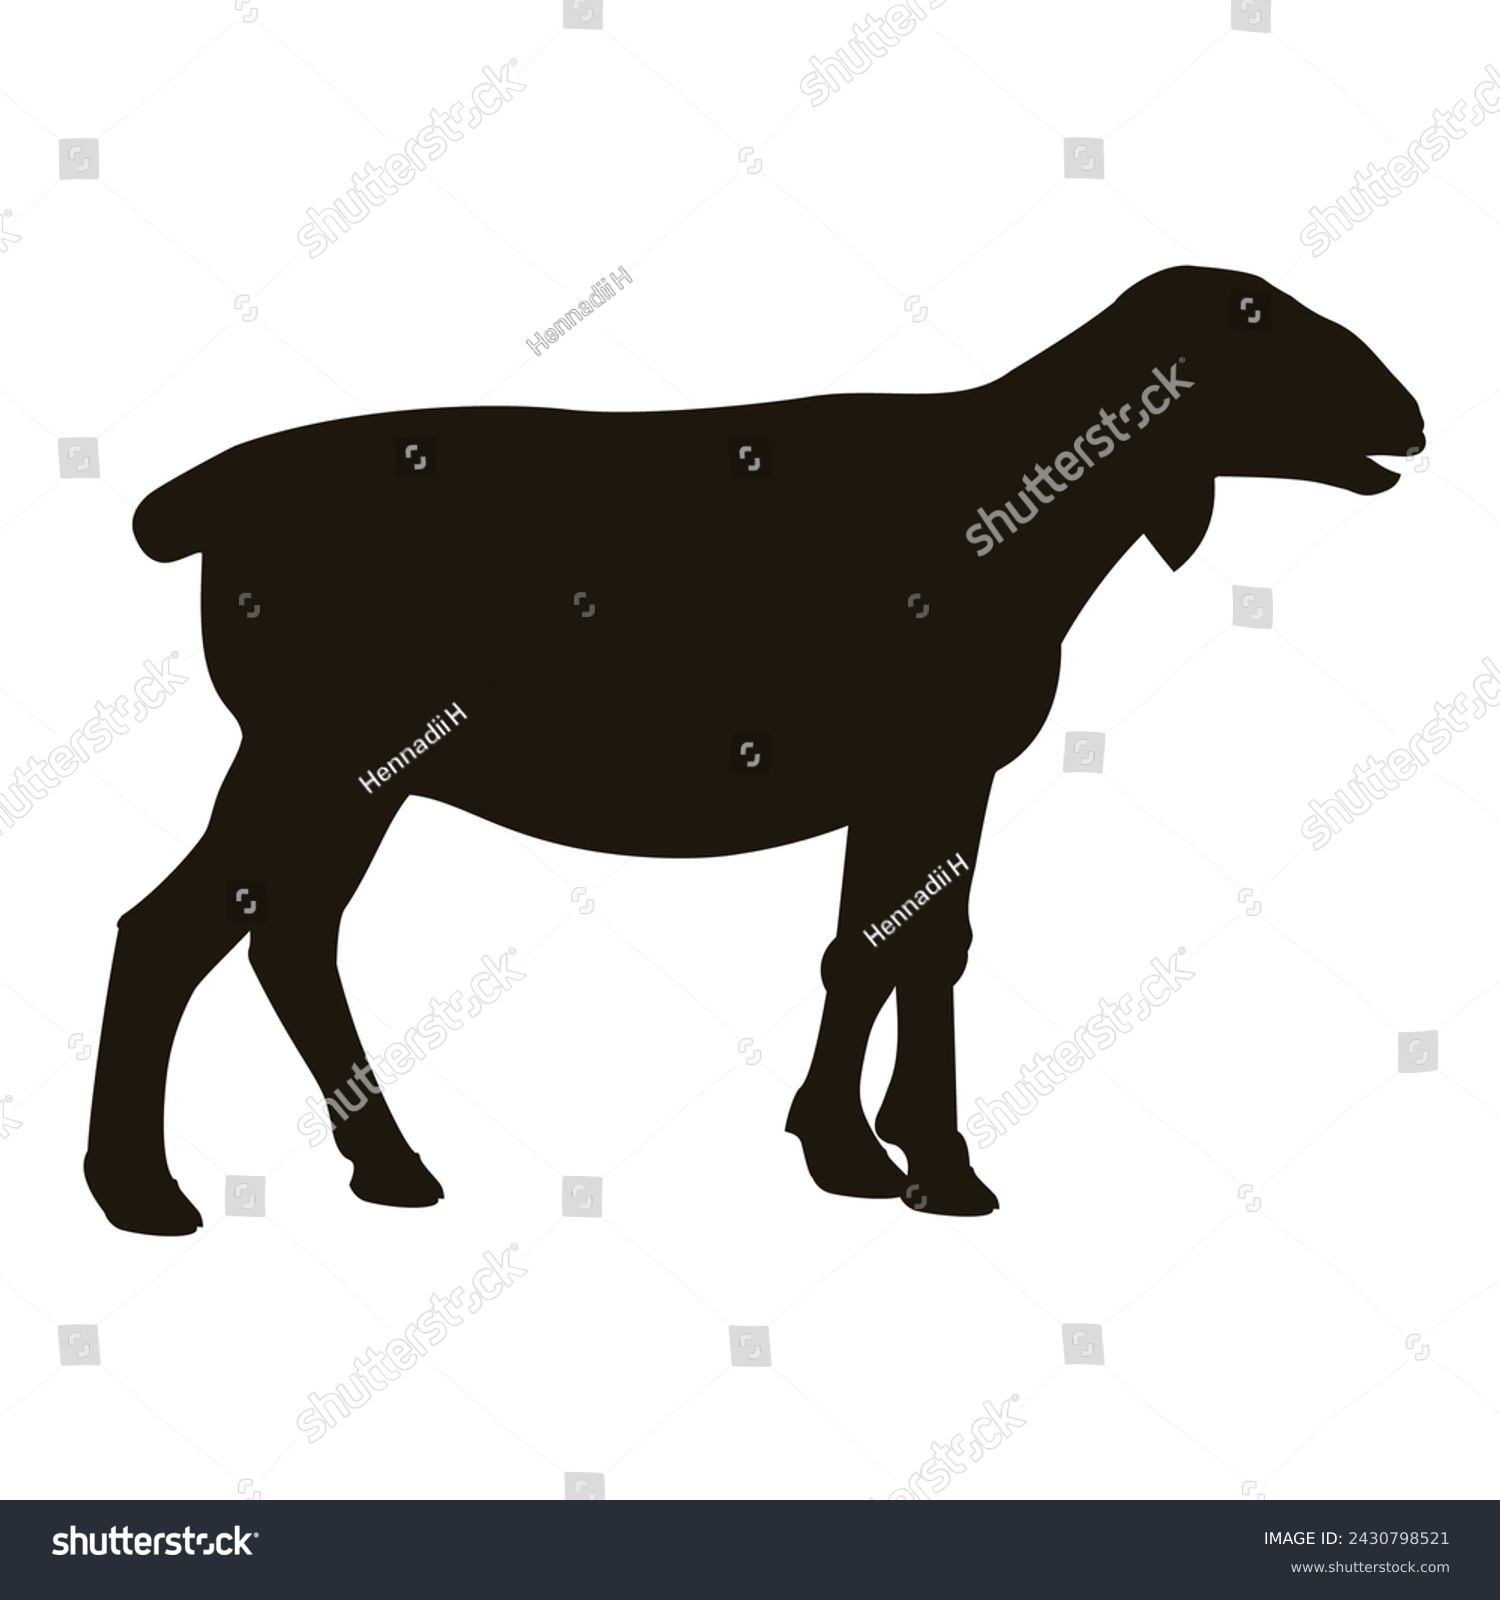 SVG of Sheep silhouette side view. Lamb icon. Farm animal. Vector illustration isolated on a white background svg